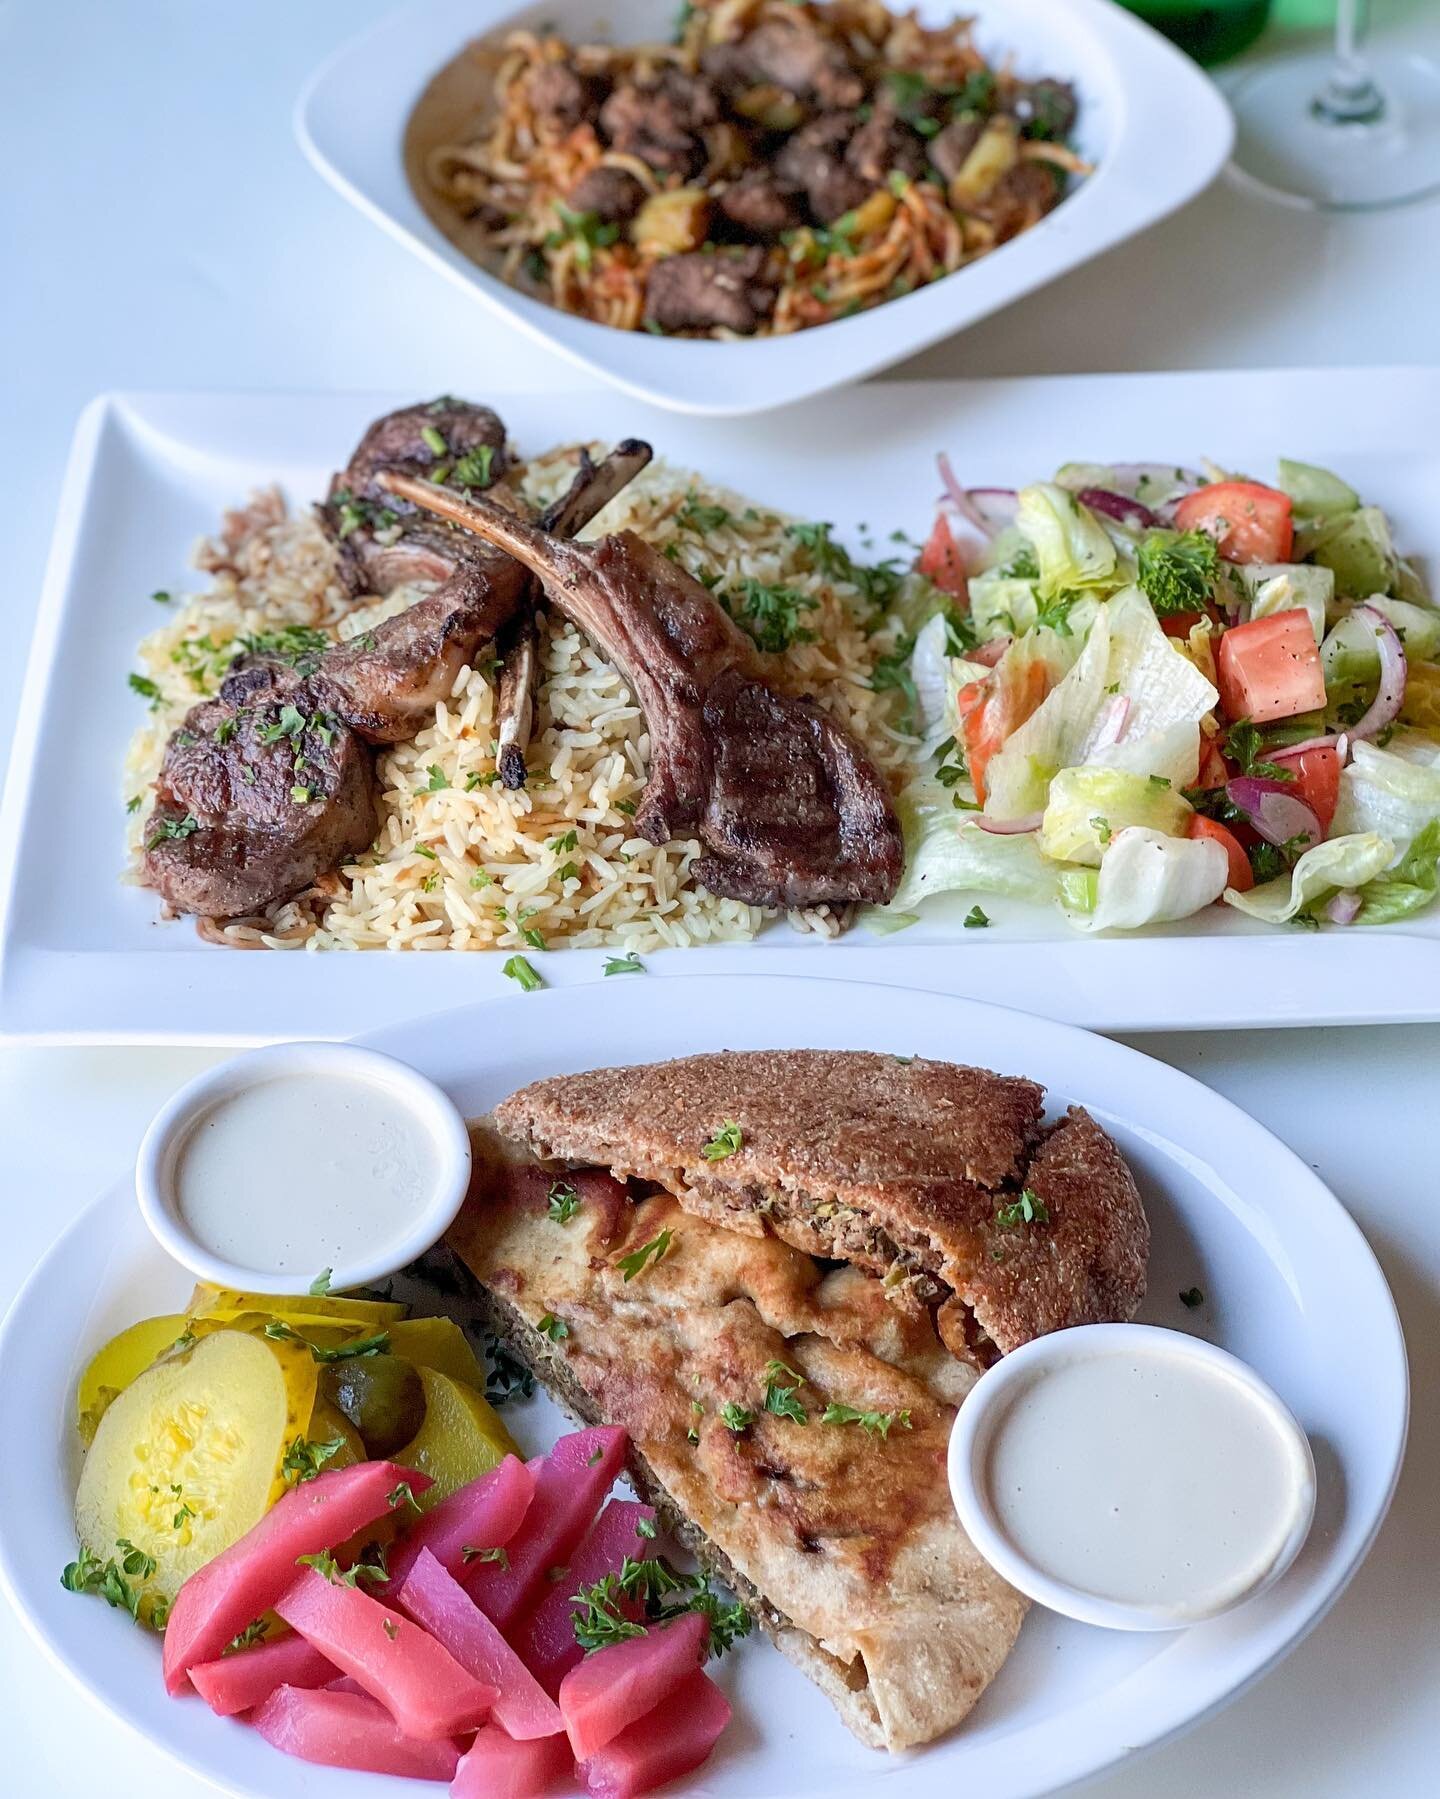 We are open 7 days a week to serve you the best Egyptian foods you crave 

Dine-in &bull; Take out &bull; Delivery &bull; Catering 
Sunday- Thursday 11am to 10pm
Friday- Saturday 12pm to 11pm 

#tastetoronto #mediterraneandood #food #to_finest #tofin